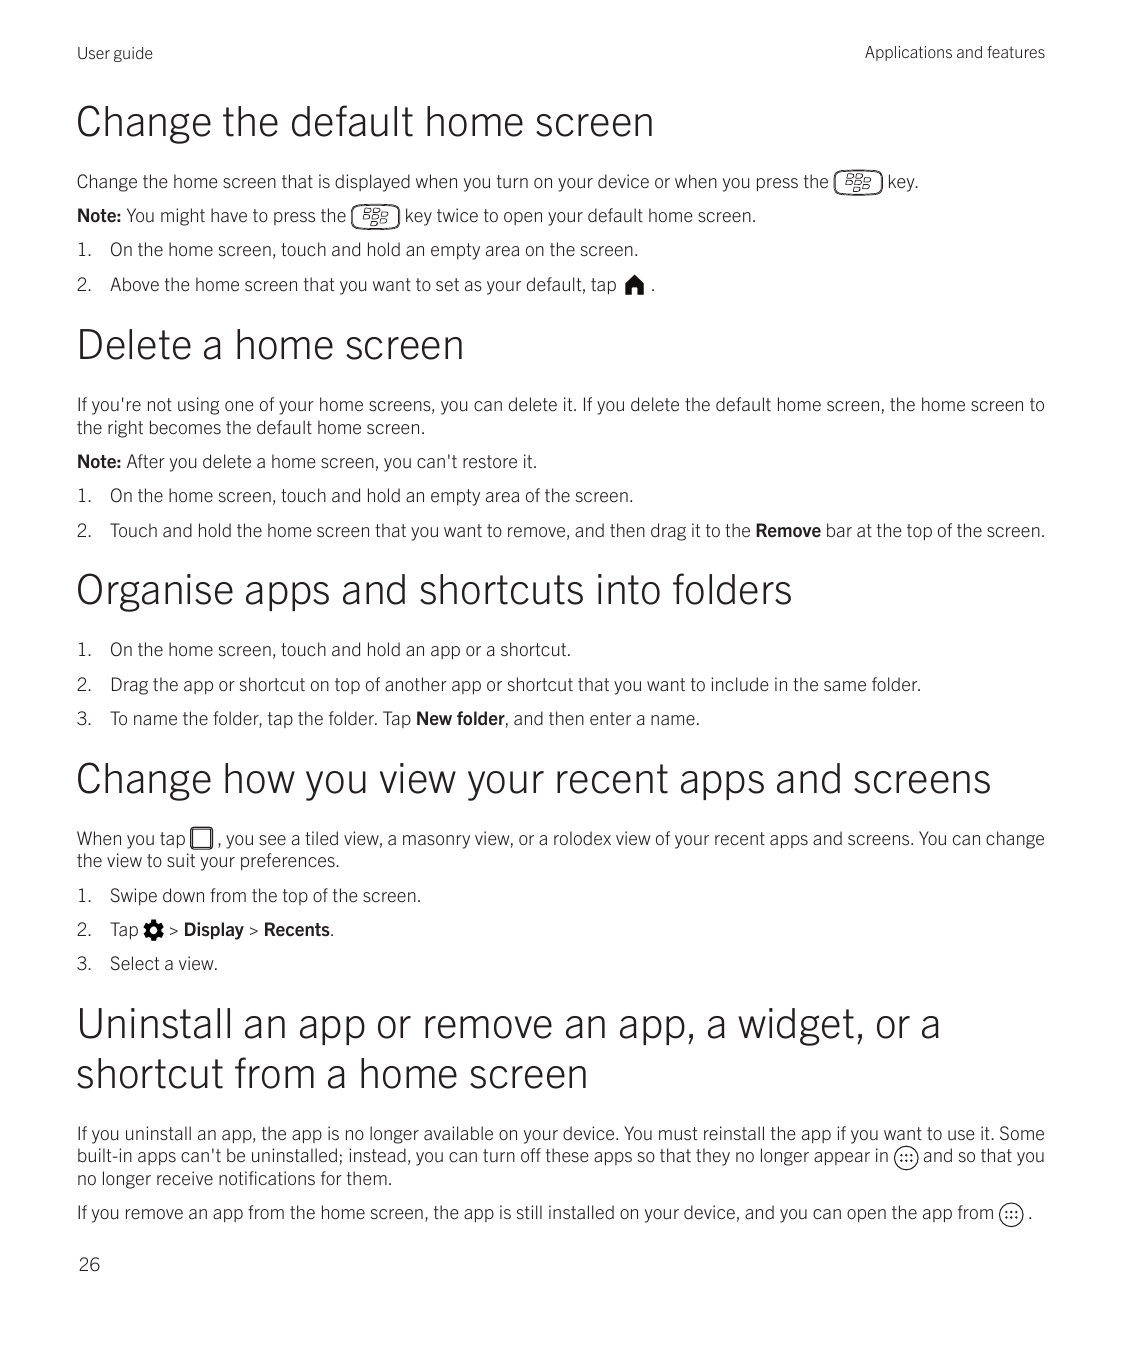 Applications and featuresUser guideChange the default home screenChange the home screen that is displayed when you turn on your 